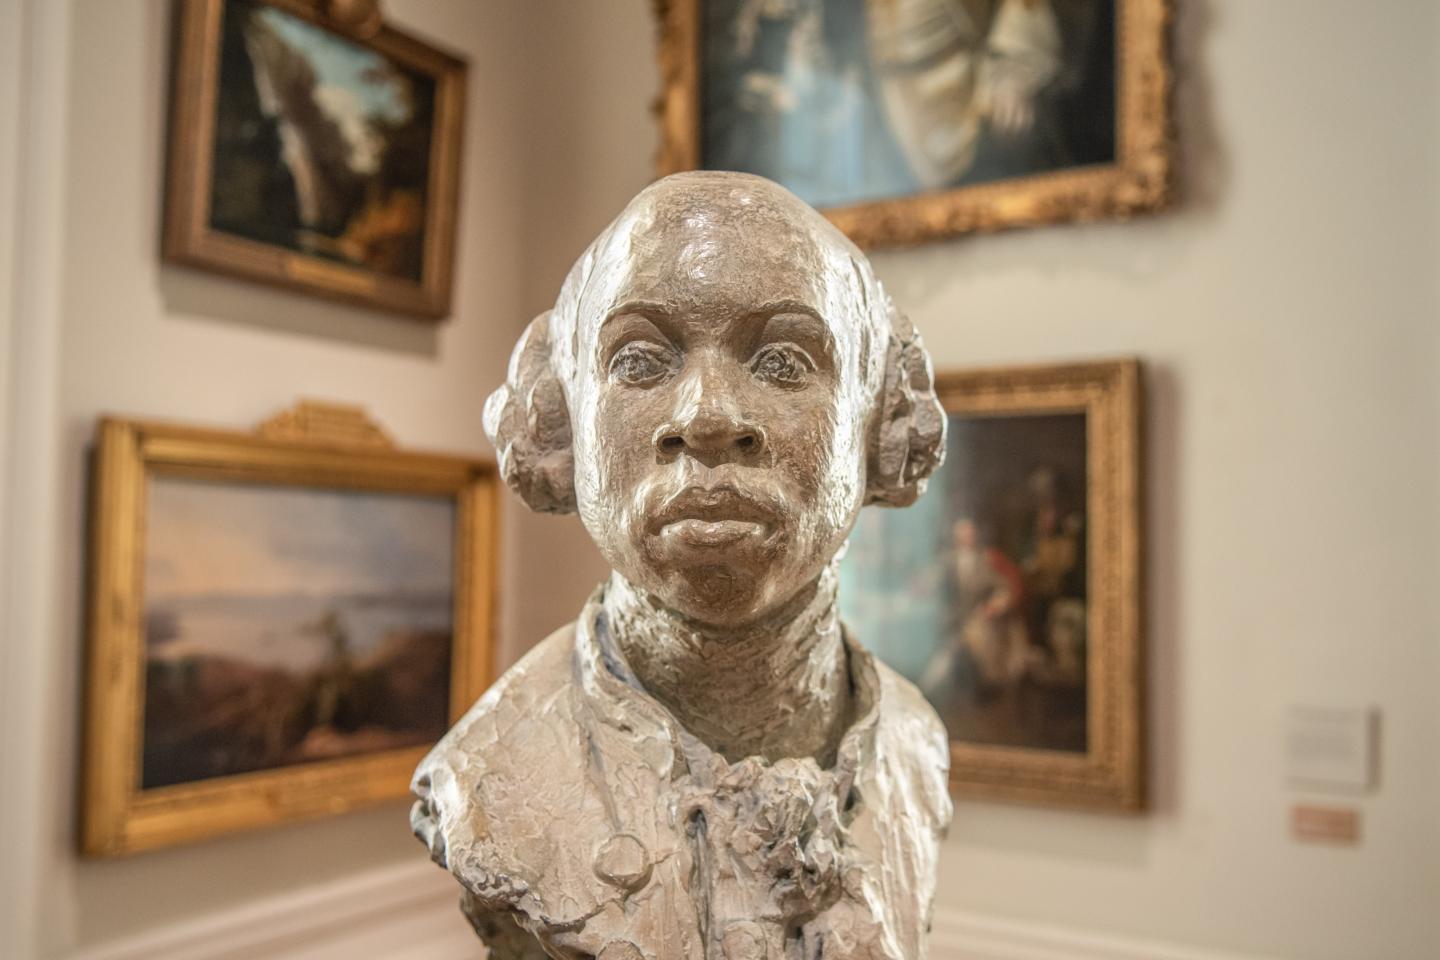 Sculpture of Olaudah Equiano in the Queen's House